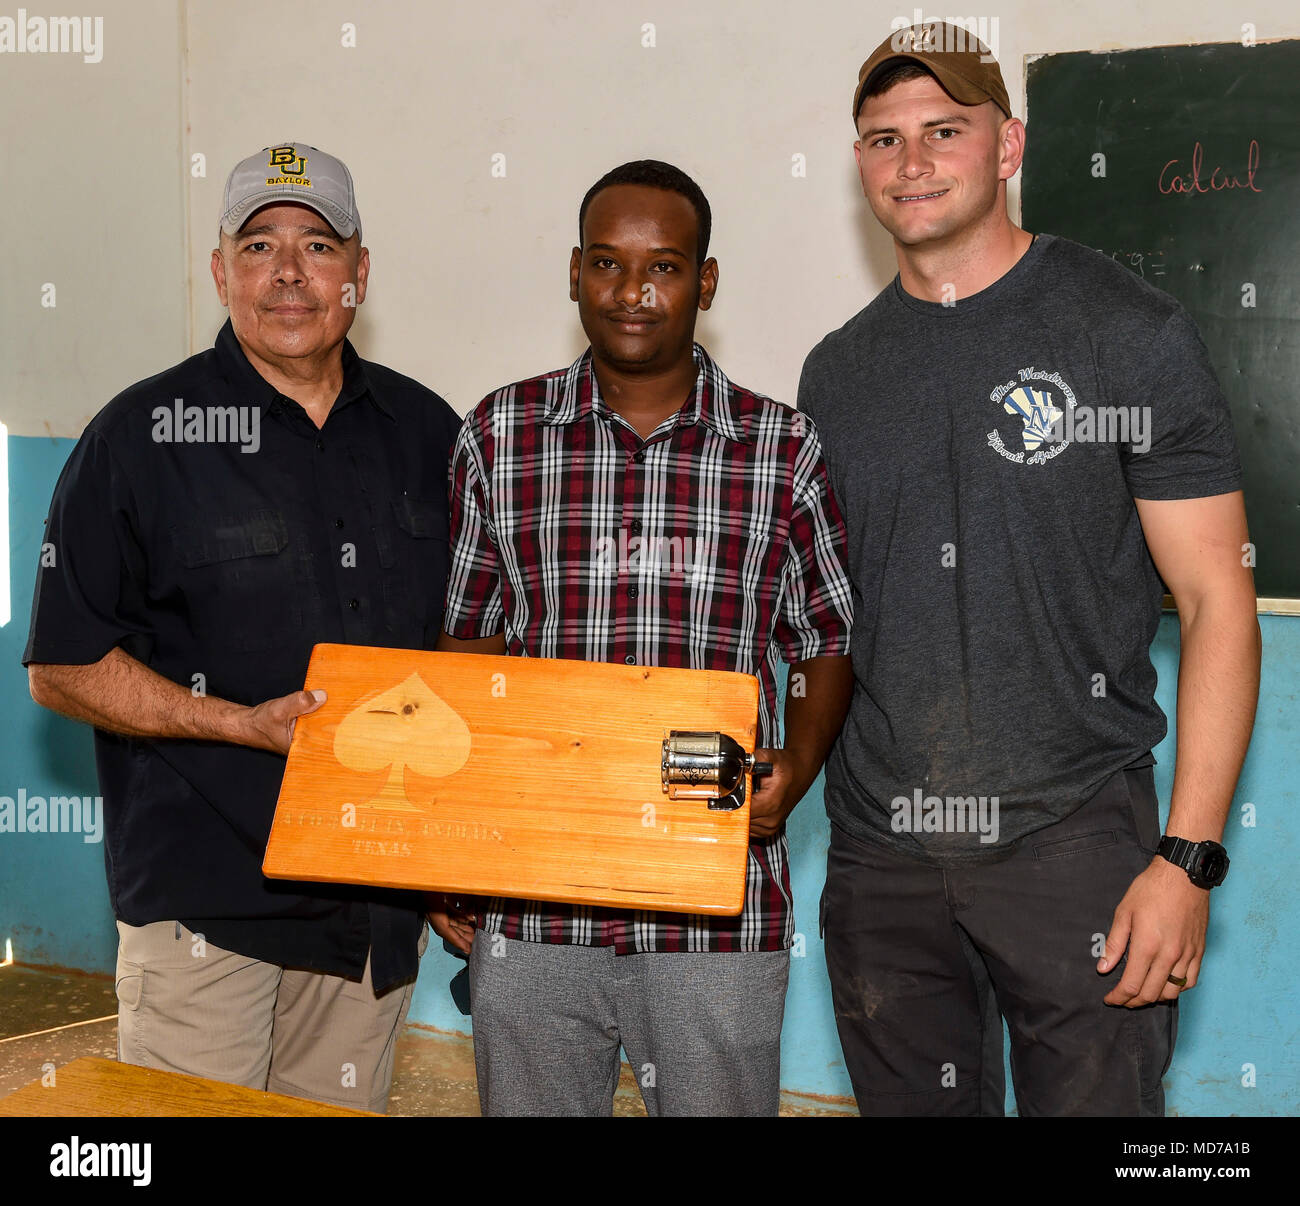 U.S. Army Sgt. 1st Class Juan Vela, left, and 1st Lt. Aidan Dietz, right, both with Animal Company, 3rd Battalion, 141st Infantry Regiment, assigned to Combined Joint Task Force - Horn of Africa (CJTF-HOA), present a portable manual pencil sharpener to Amin Houssein, teacher, in Ali Oune, Djibouti, March 28, 2018. CJTF-HOA service members donated more than $400 of school supplies and sandals to Somali refugee students in Djibouti. (U.S. Air Force photo by Staff Sgt. Timothy Moore) Stock Photo